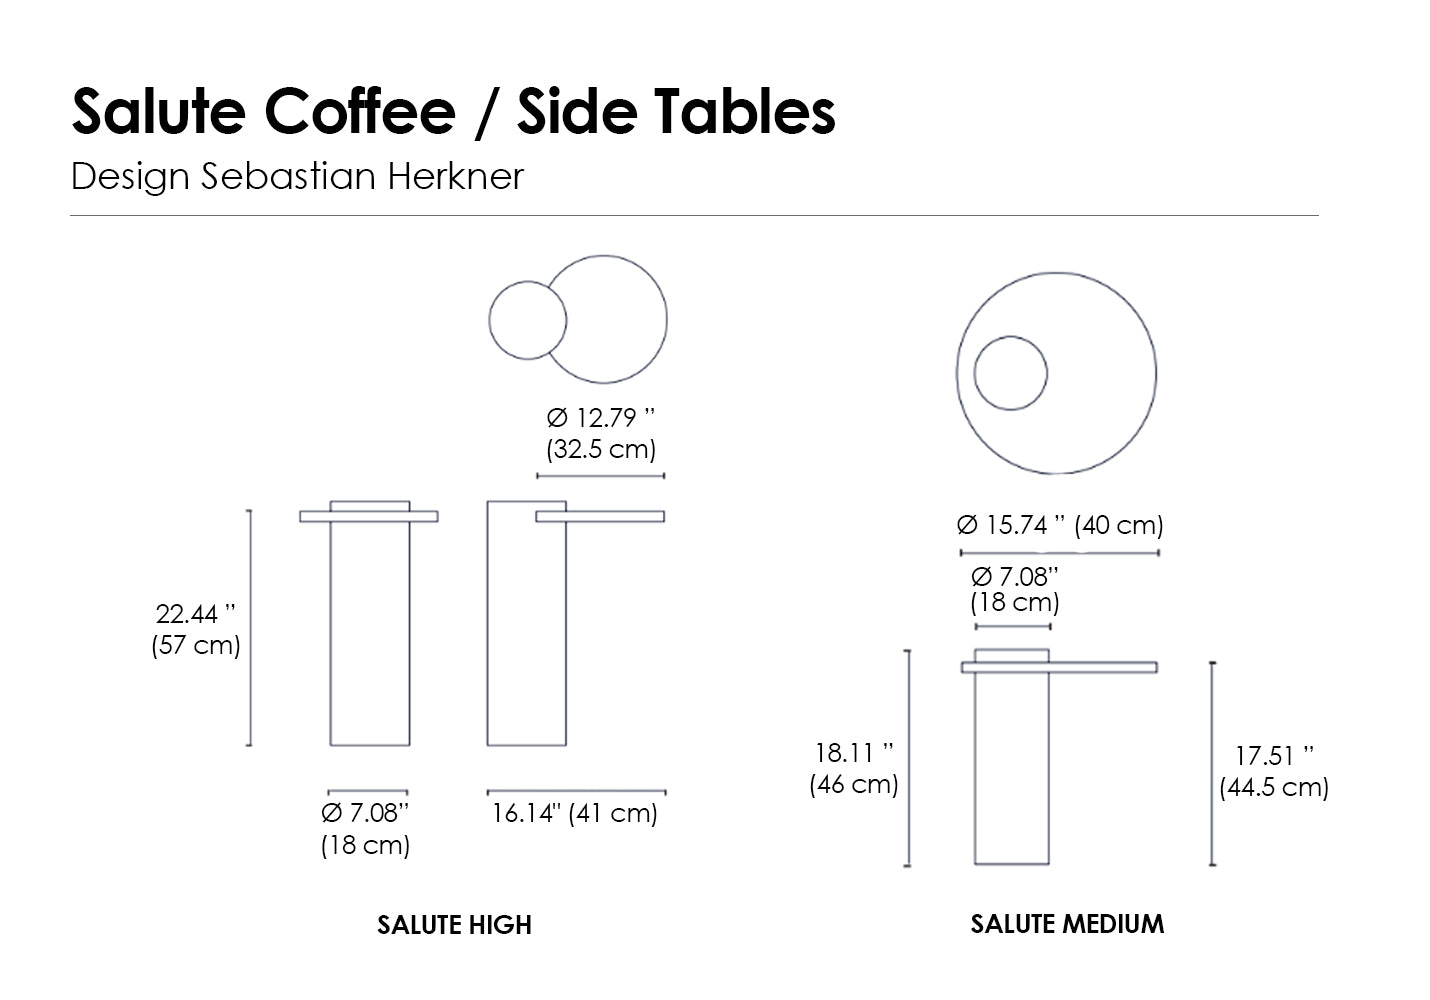 Salute Coffee / Side Tables